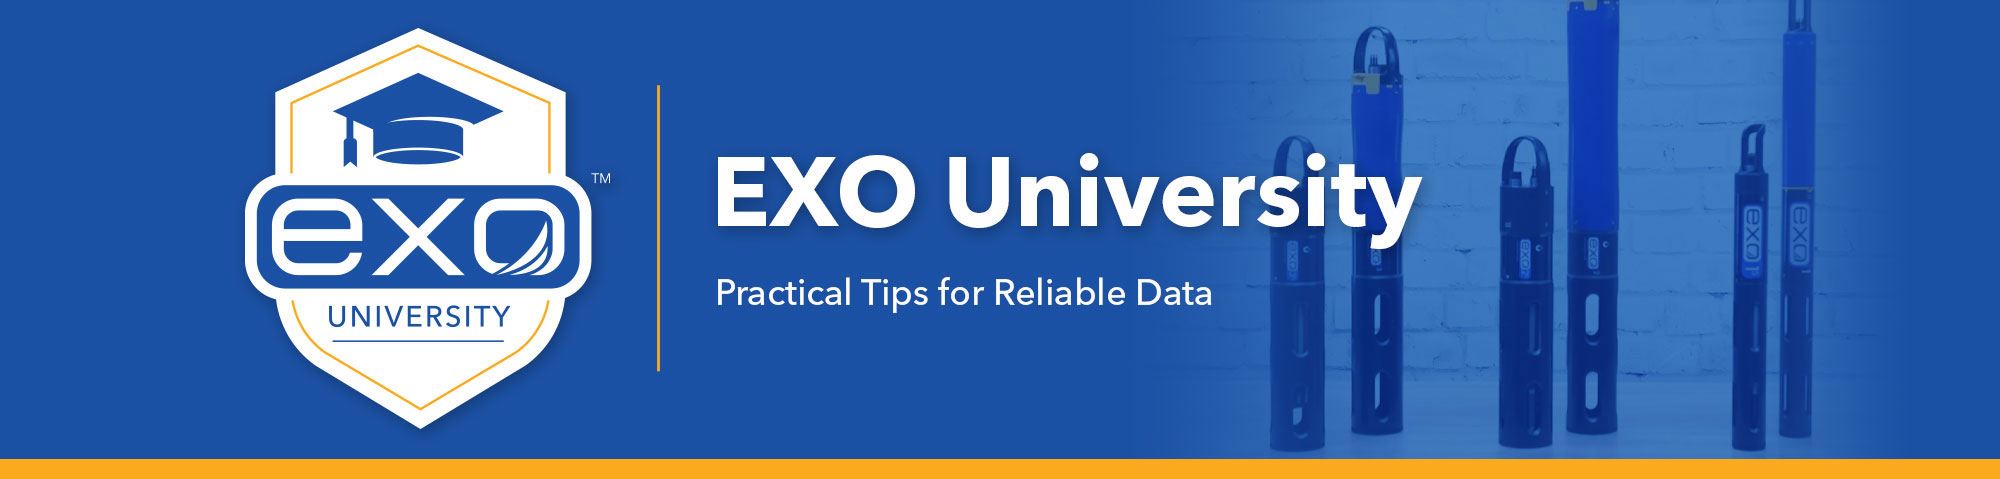 Give your feedback for EXO University